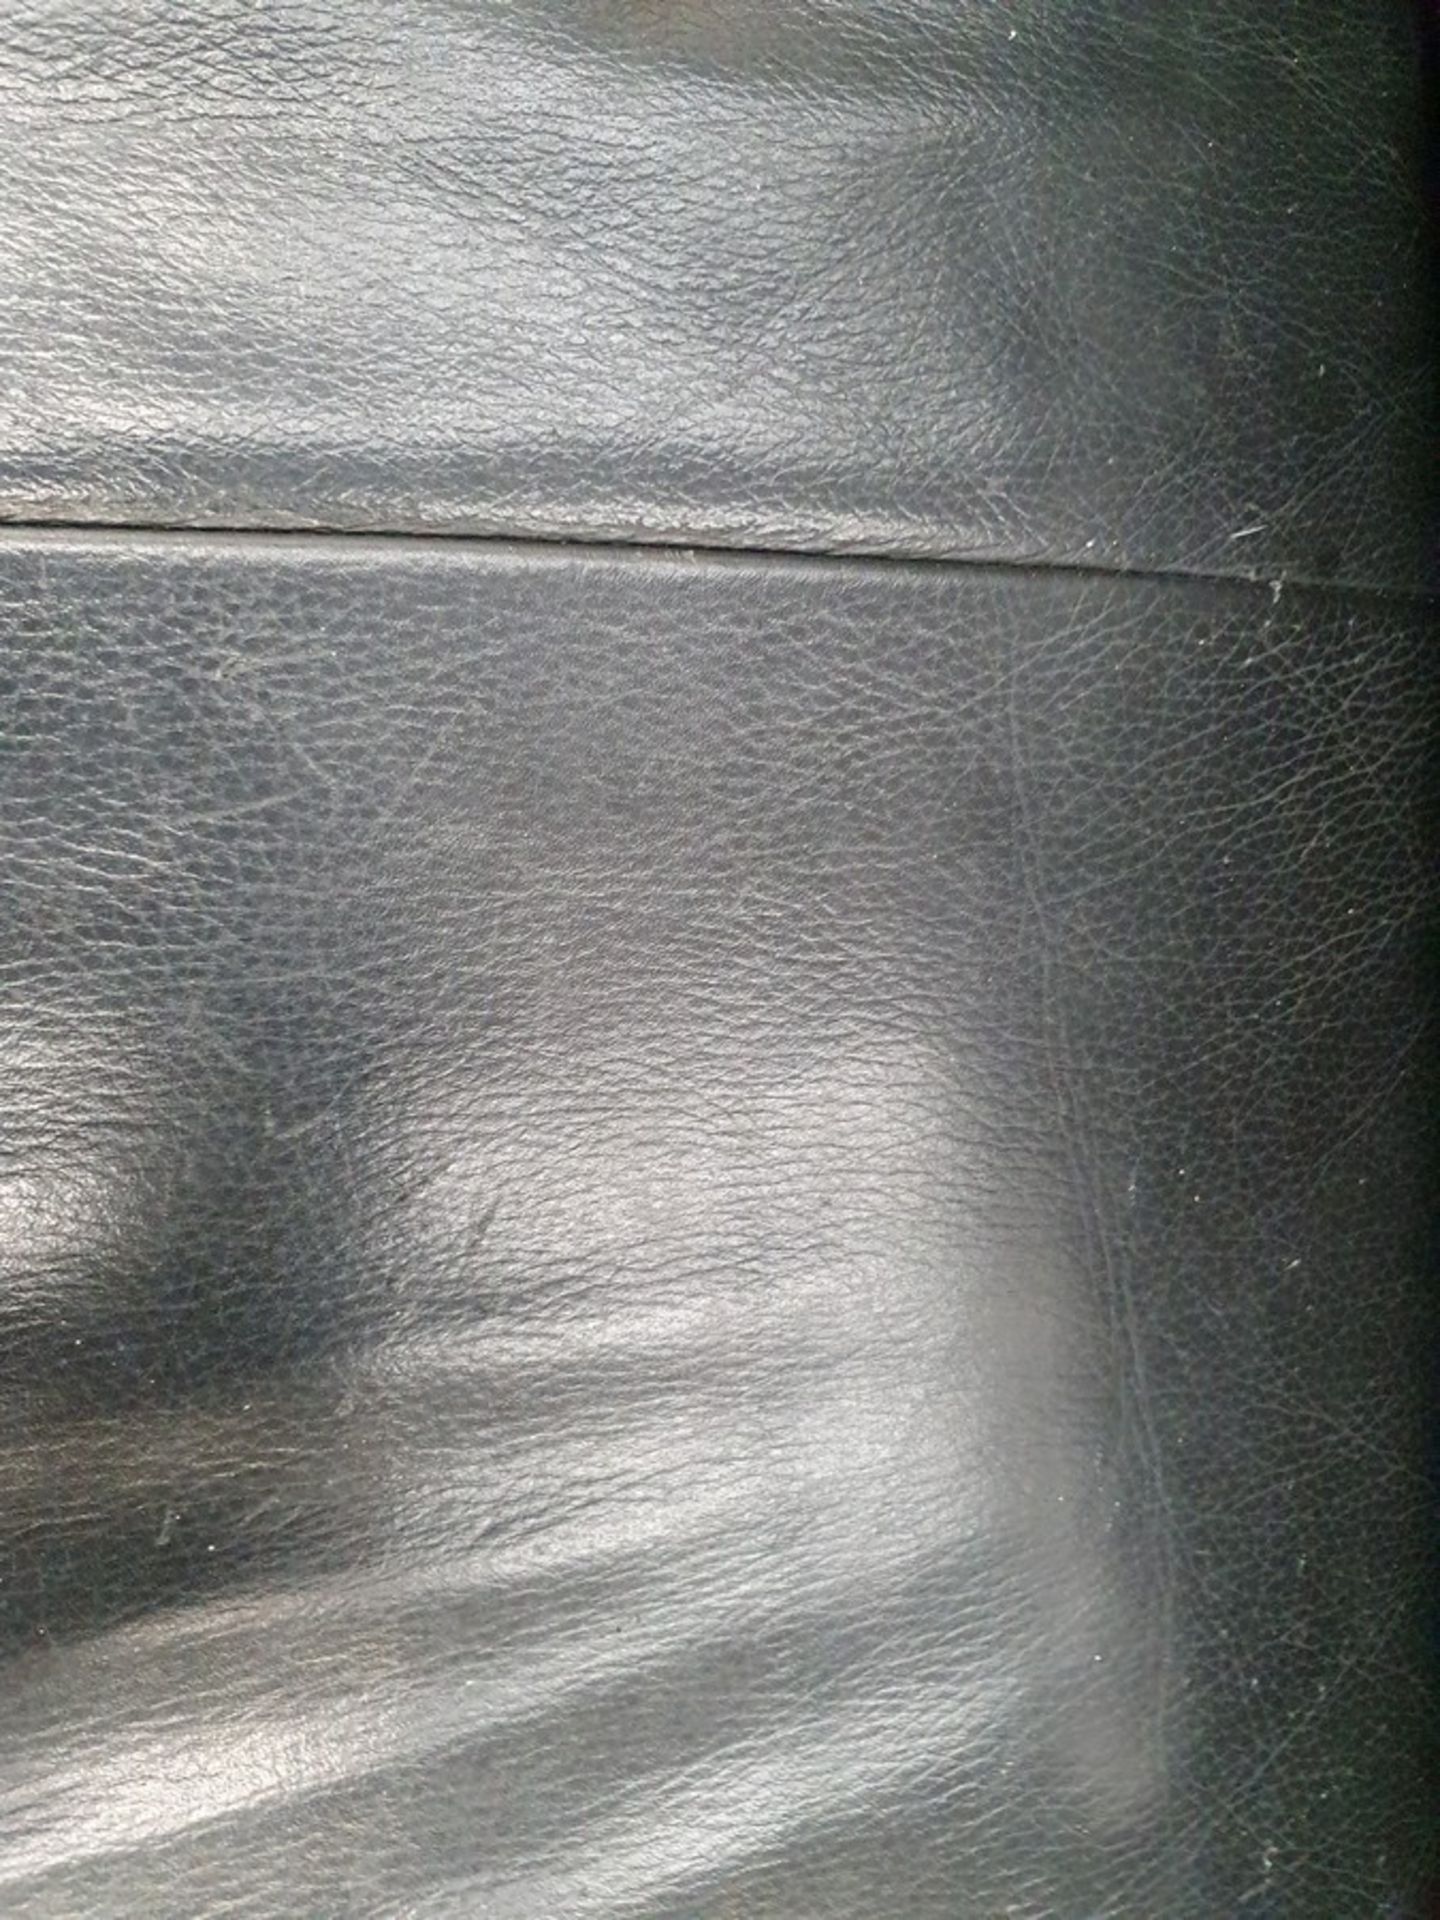 Lounge set of a 3 Seater Black Leather sofa with matching Arm chair, used with a few scratches and - Image 3 of 4